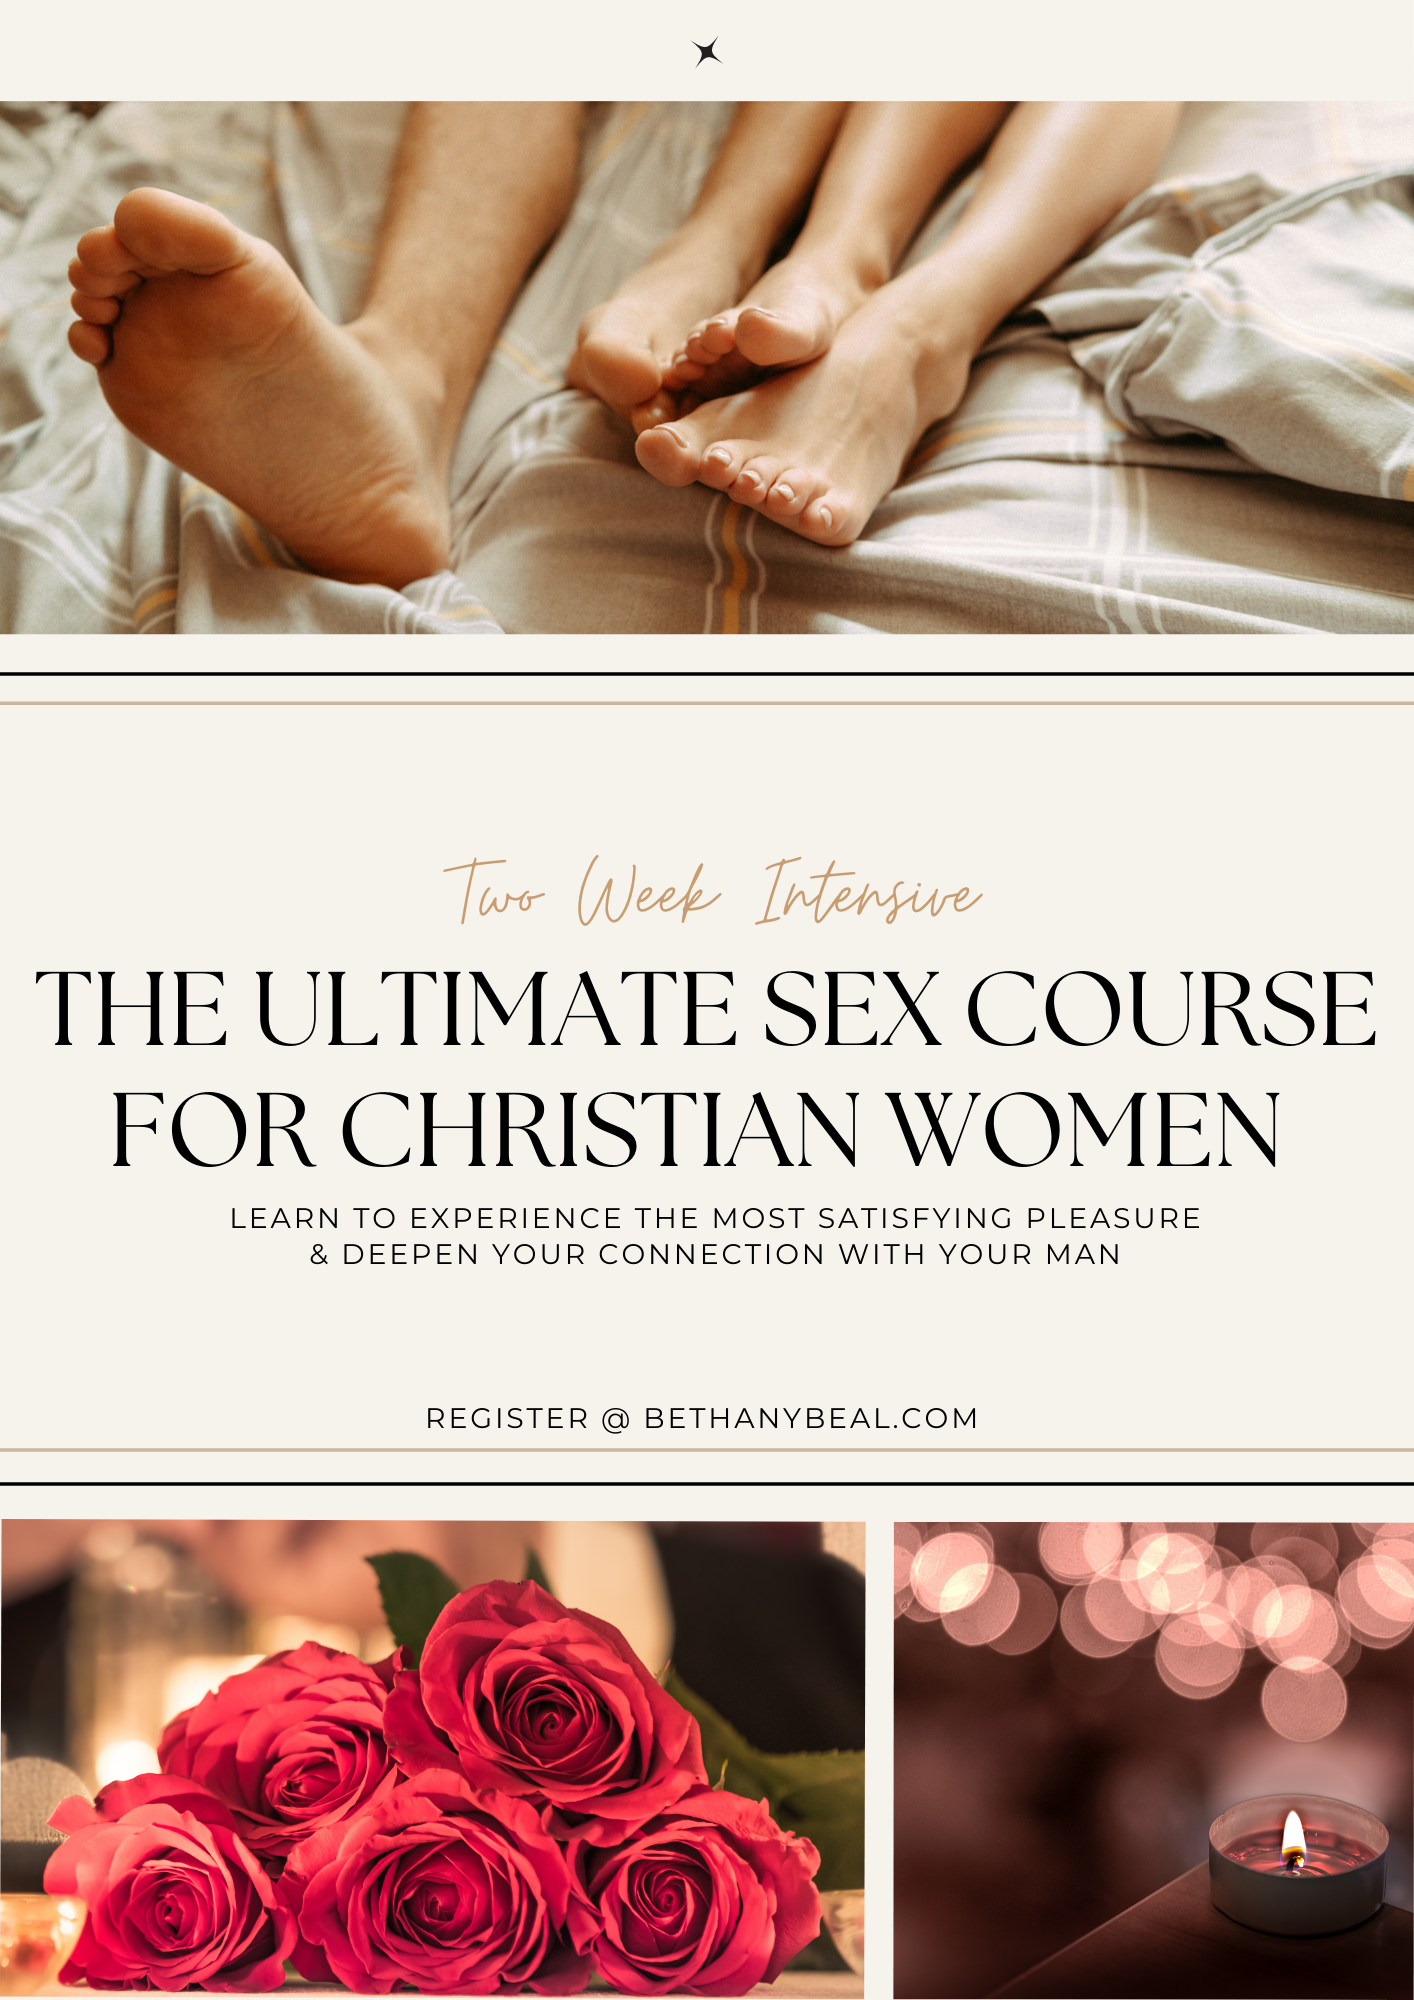 married christian sex guide online